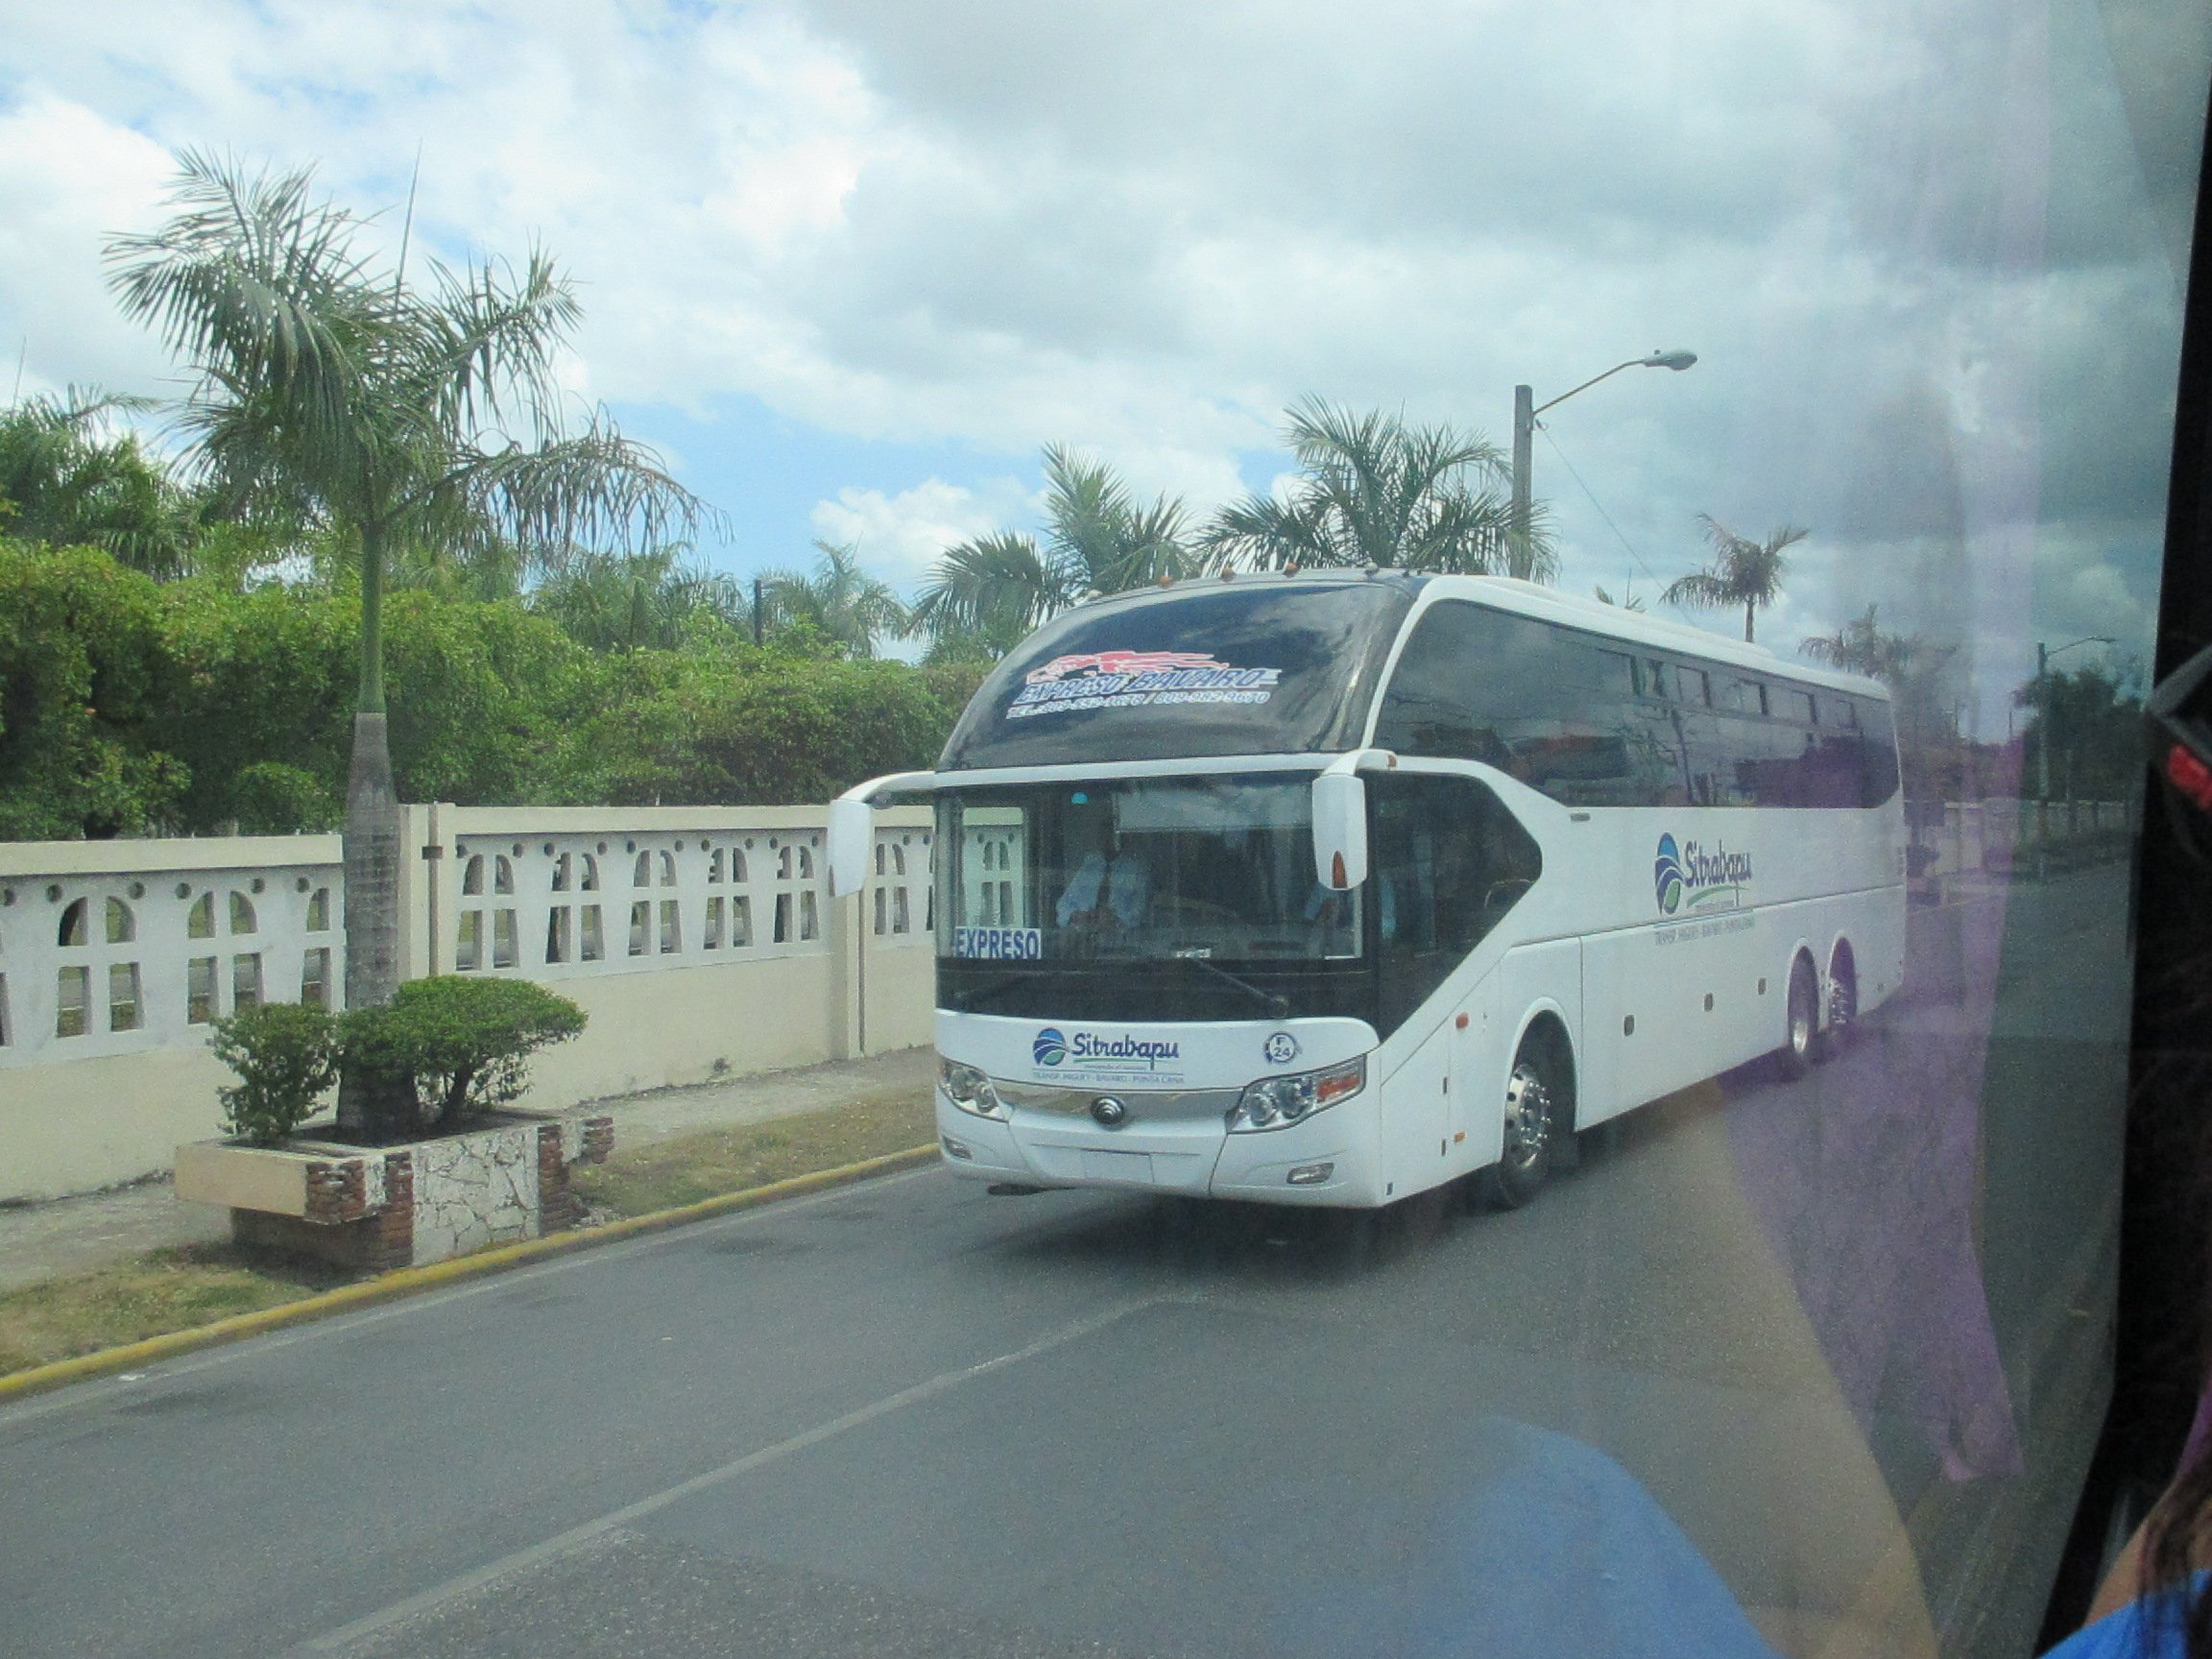 How To Get From Santiago to Punta Cana Airport - All Possible Ways, cheapest way from Santiago to Punta Cana, Santiago to Punta Cana, Santiago to Punta Cana bus, Santiago to Punta Cana Airport, Caribe Tours Santiago